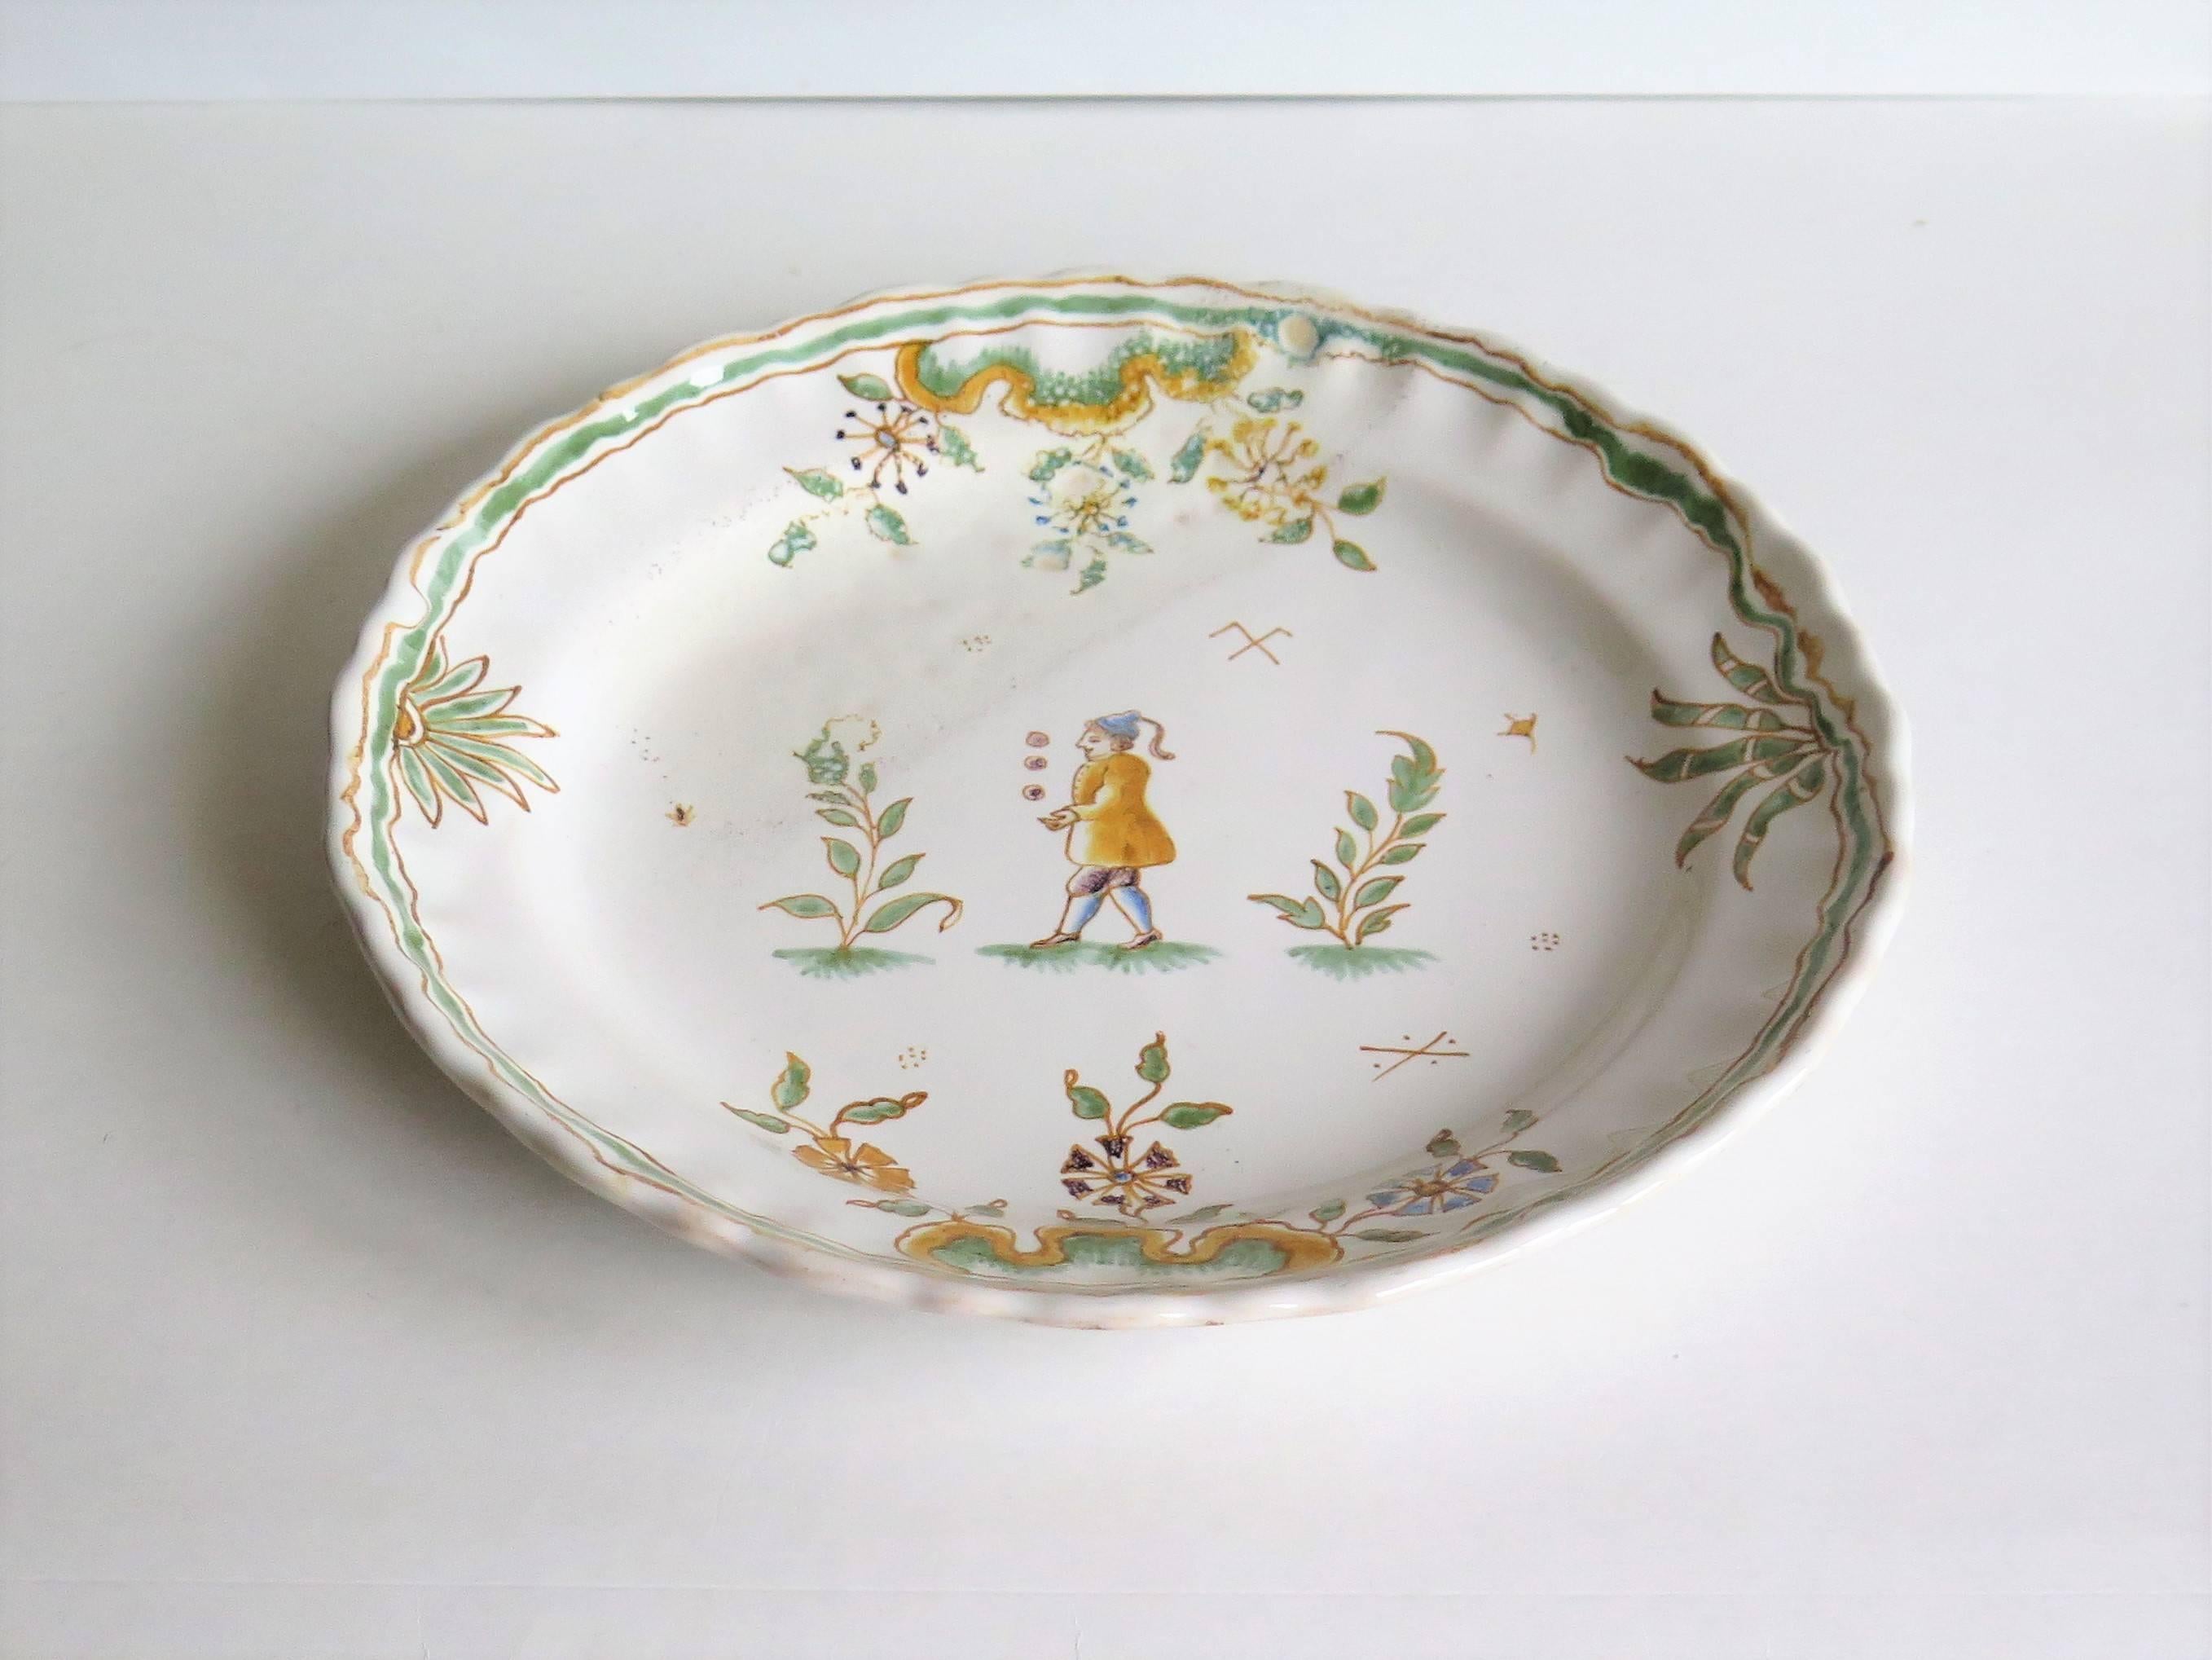 Pottery Late 18th Century, Faience Dish or Plate, Hand-Painted Juggler, circa 1790